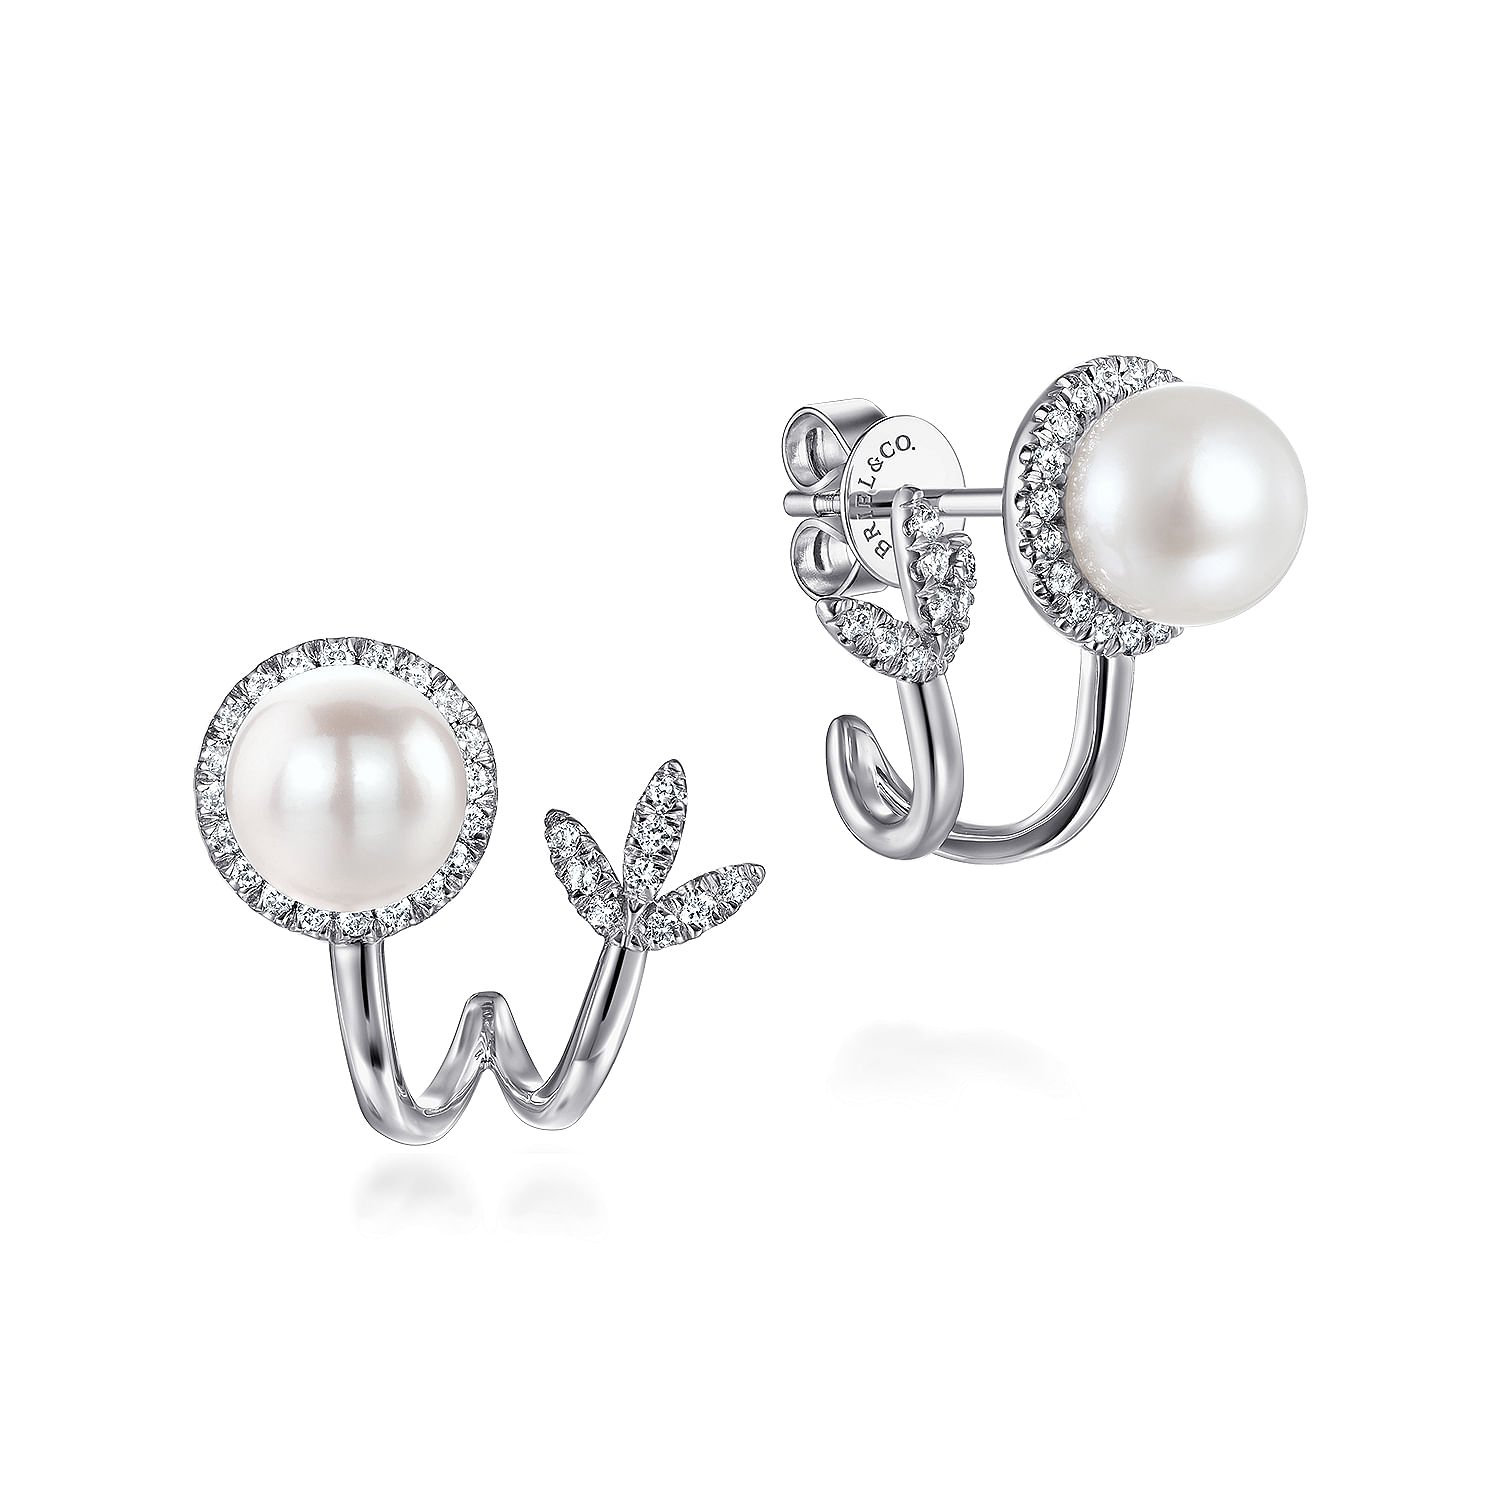 14K White Gold Diamond and Cultured Pearl J Curve Earrings